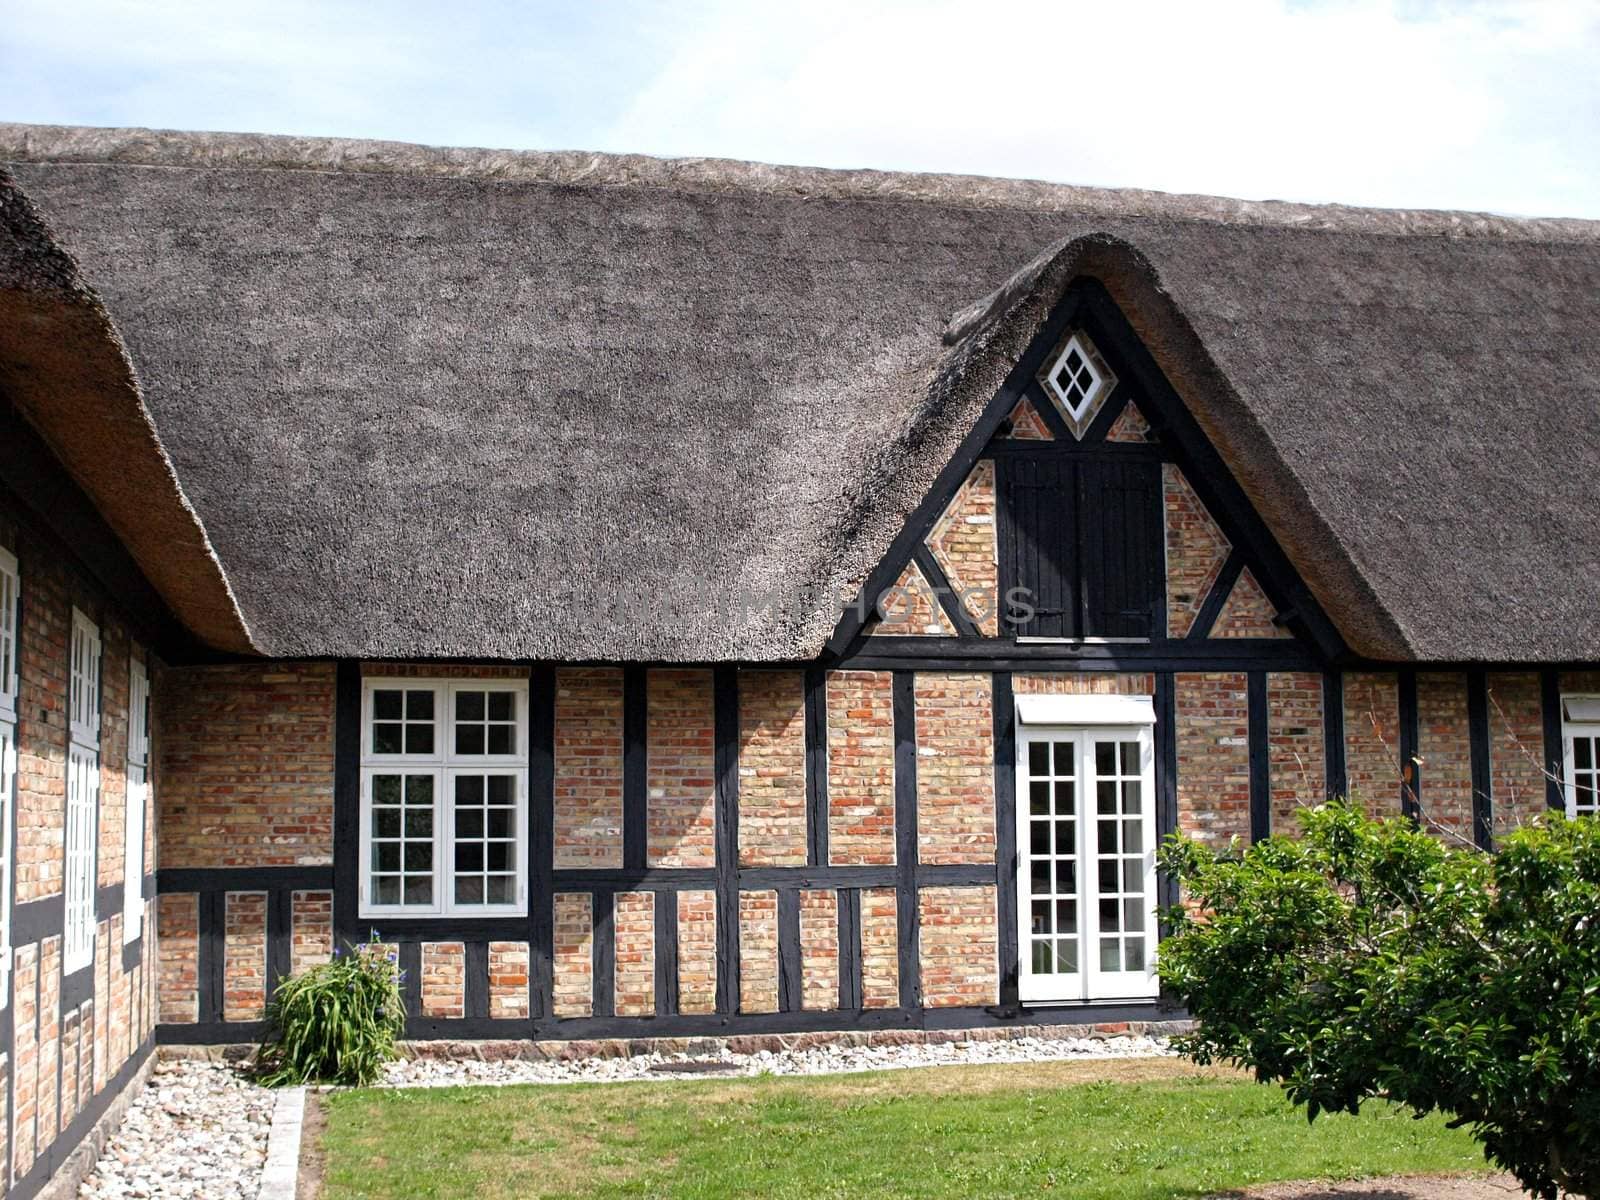 Traditional country farmhouse with old style thatched straw roof in Denmark       